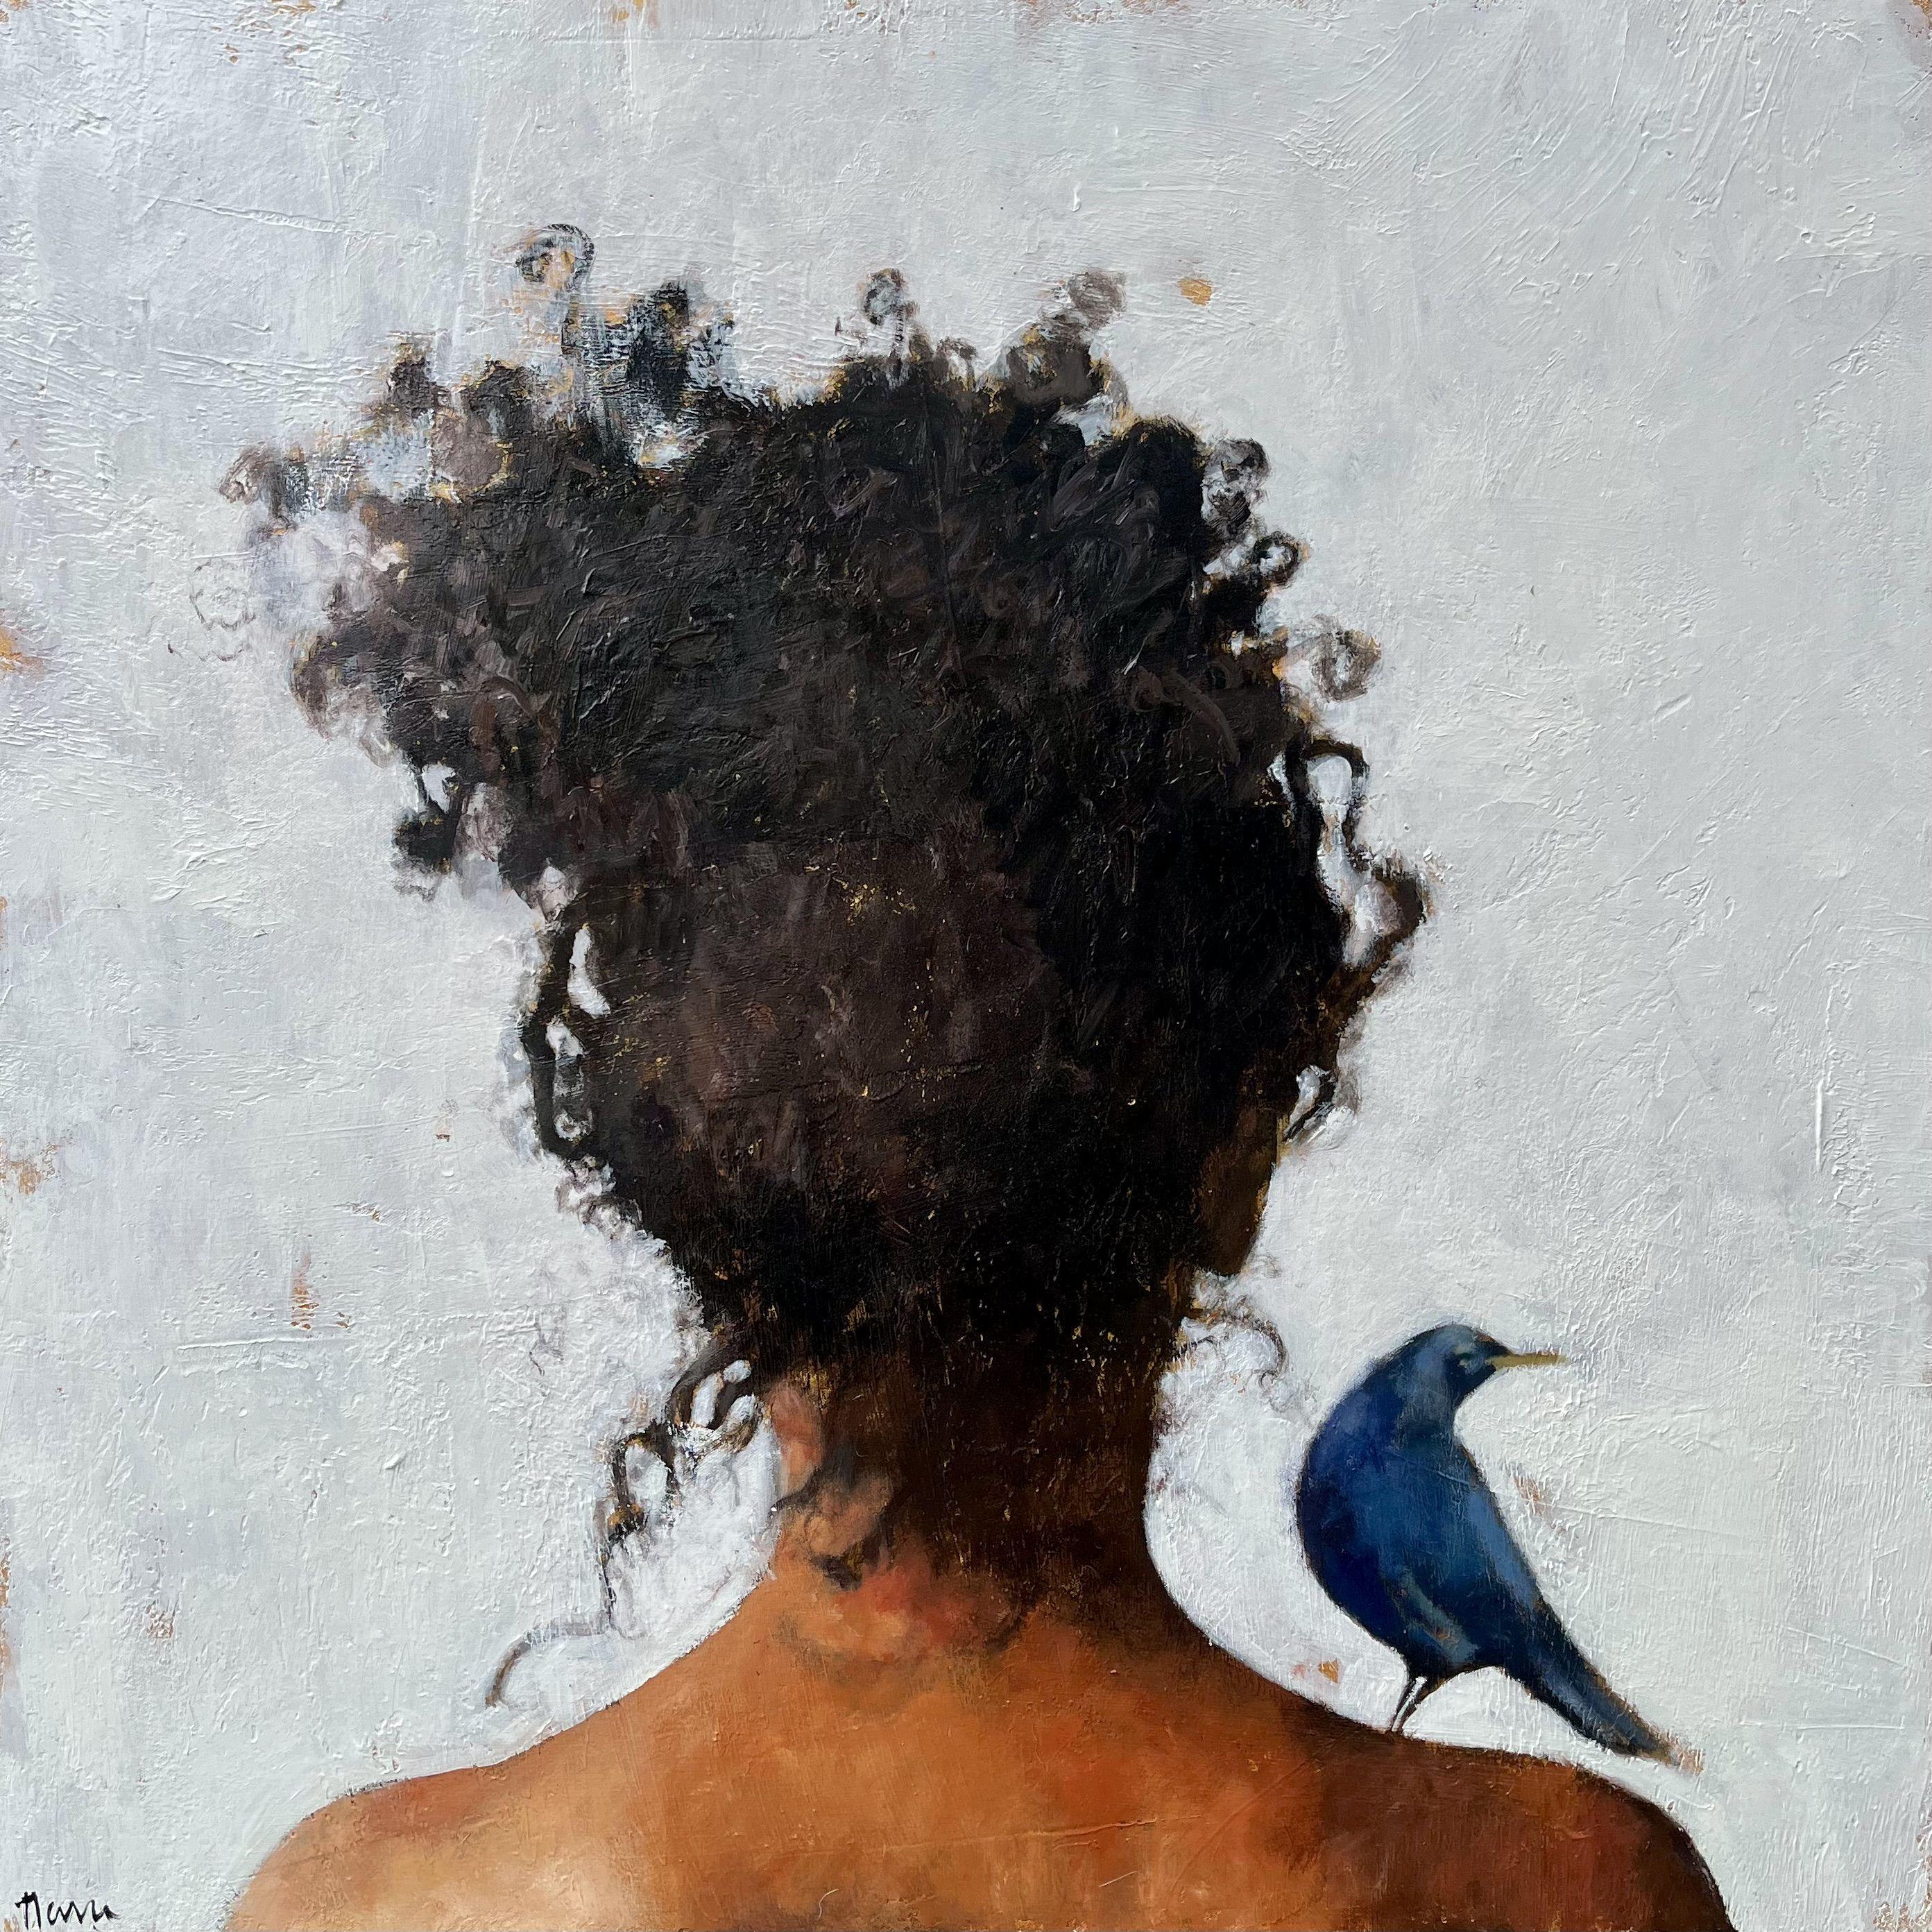 The blue bird comes to visit, comfortable perched on the girlâ€™s shoulder they are connected but physically and metaphorically.  :: Painting :: Contemporary :: This piece comes with an official certificate of authenticity signed by the artist ::